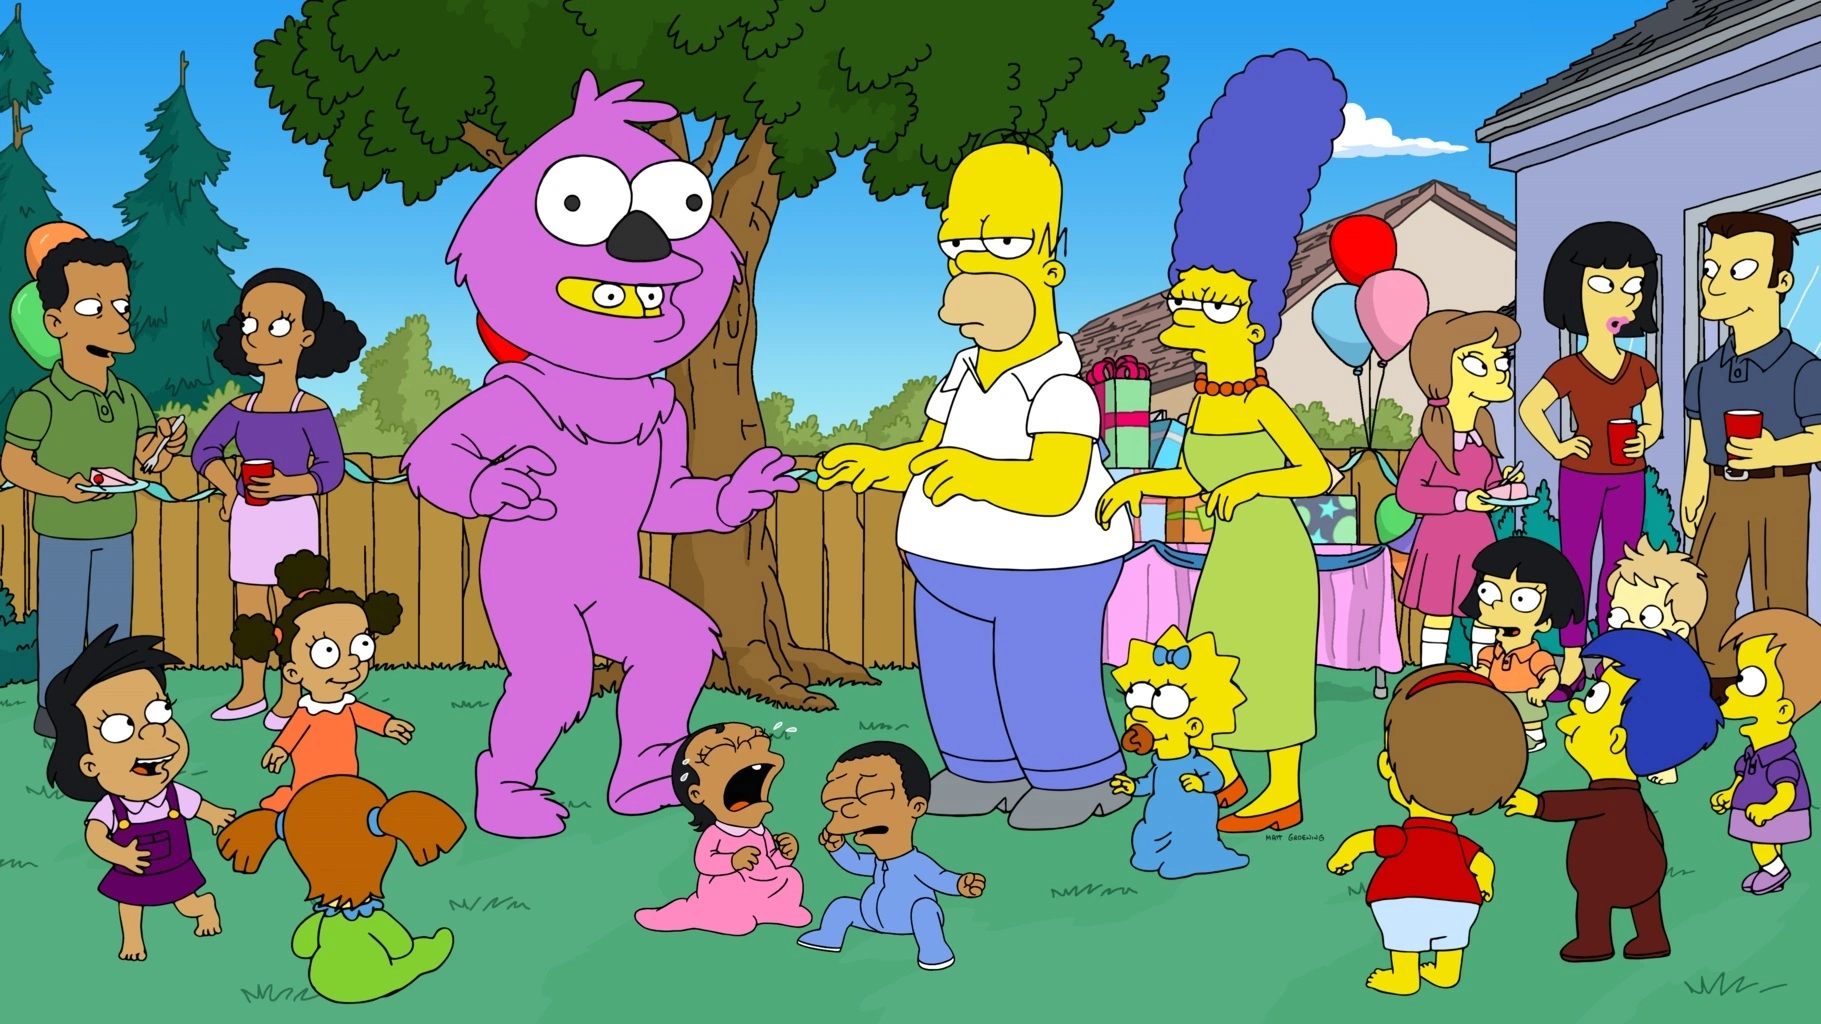 'The Simpsons' season 32 starts streaming September 29th